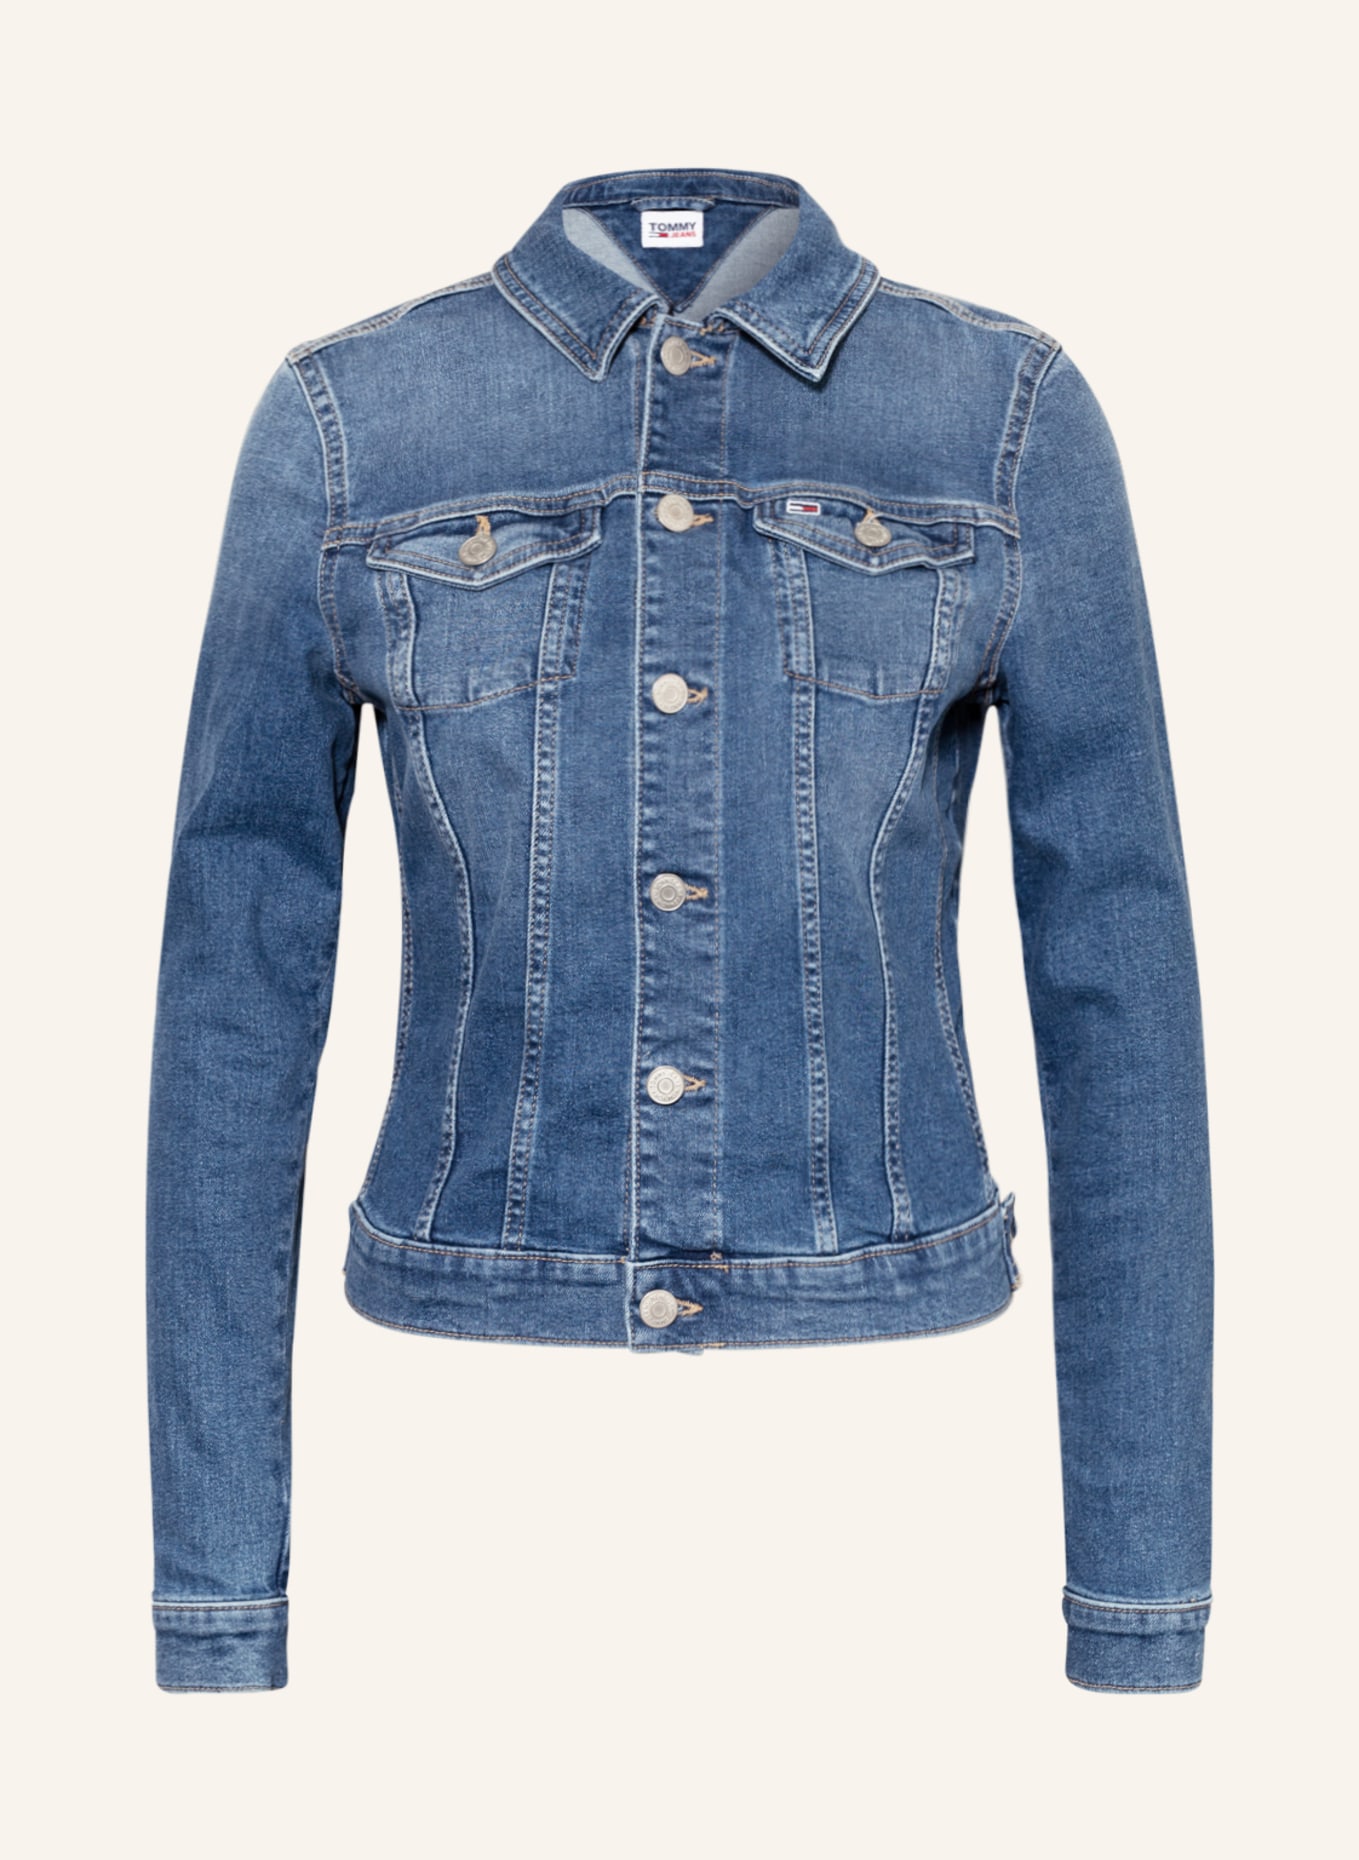 Tommy Hilfiger Cotton Denim Jacket, Created for Macy's - Macy's